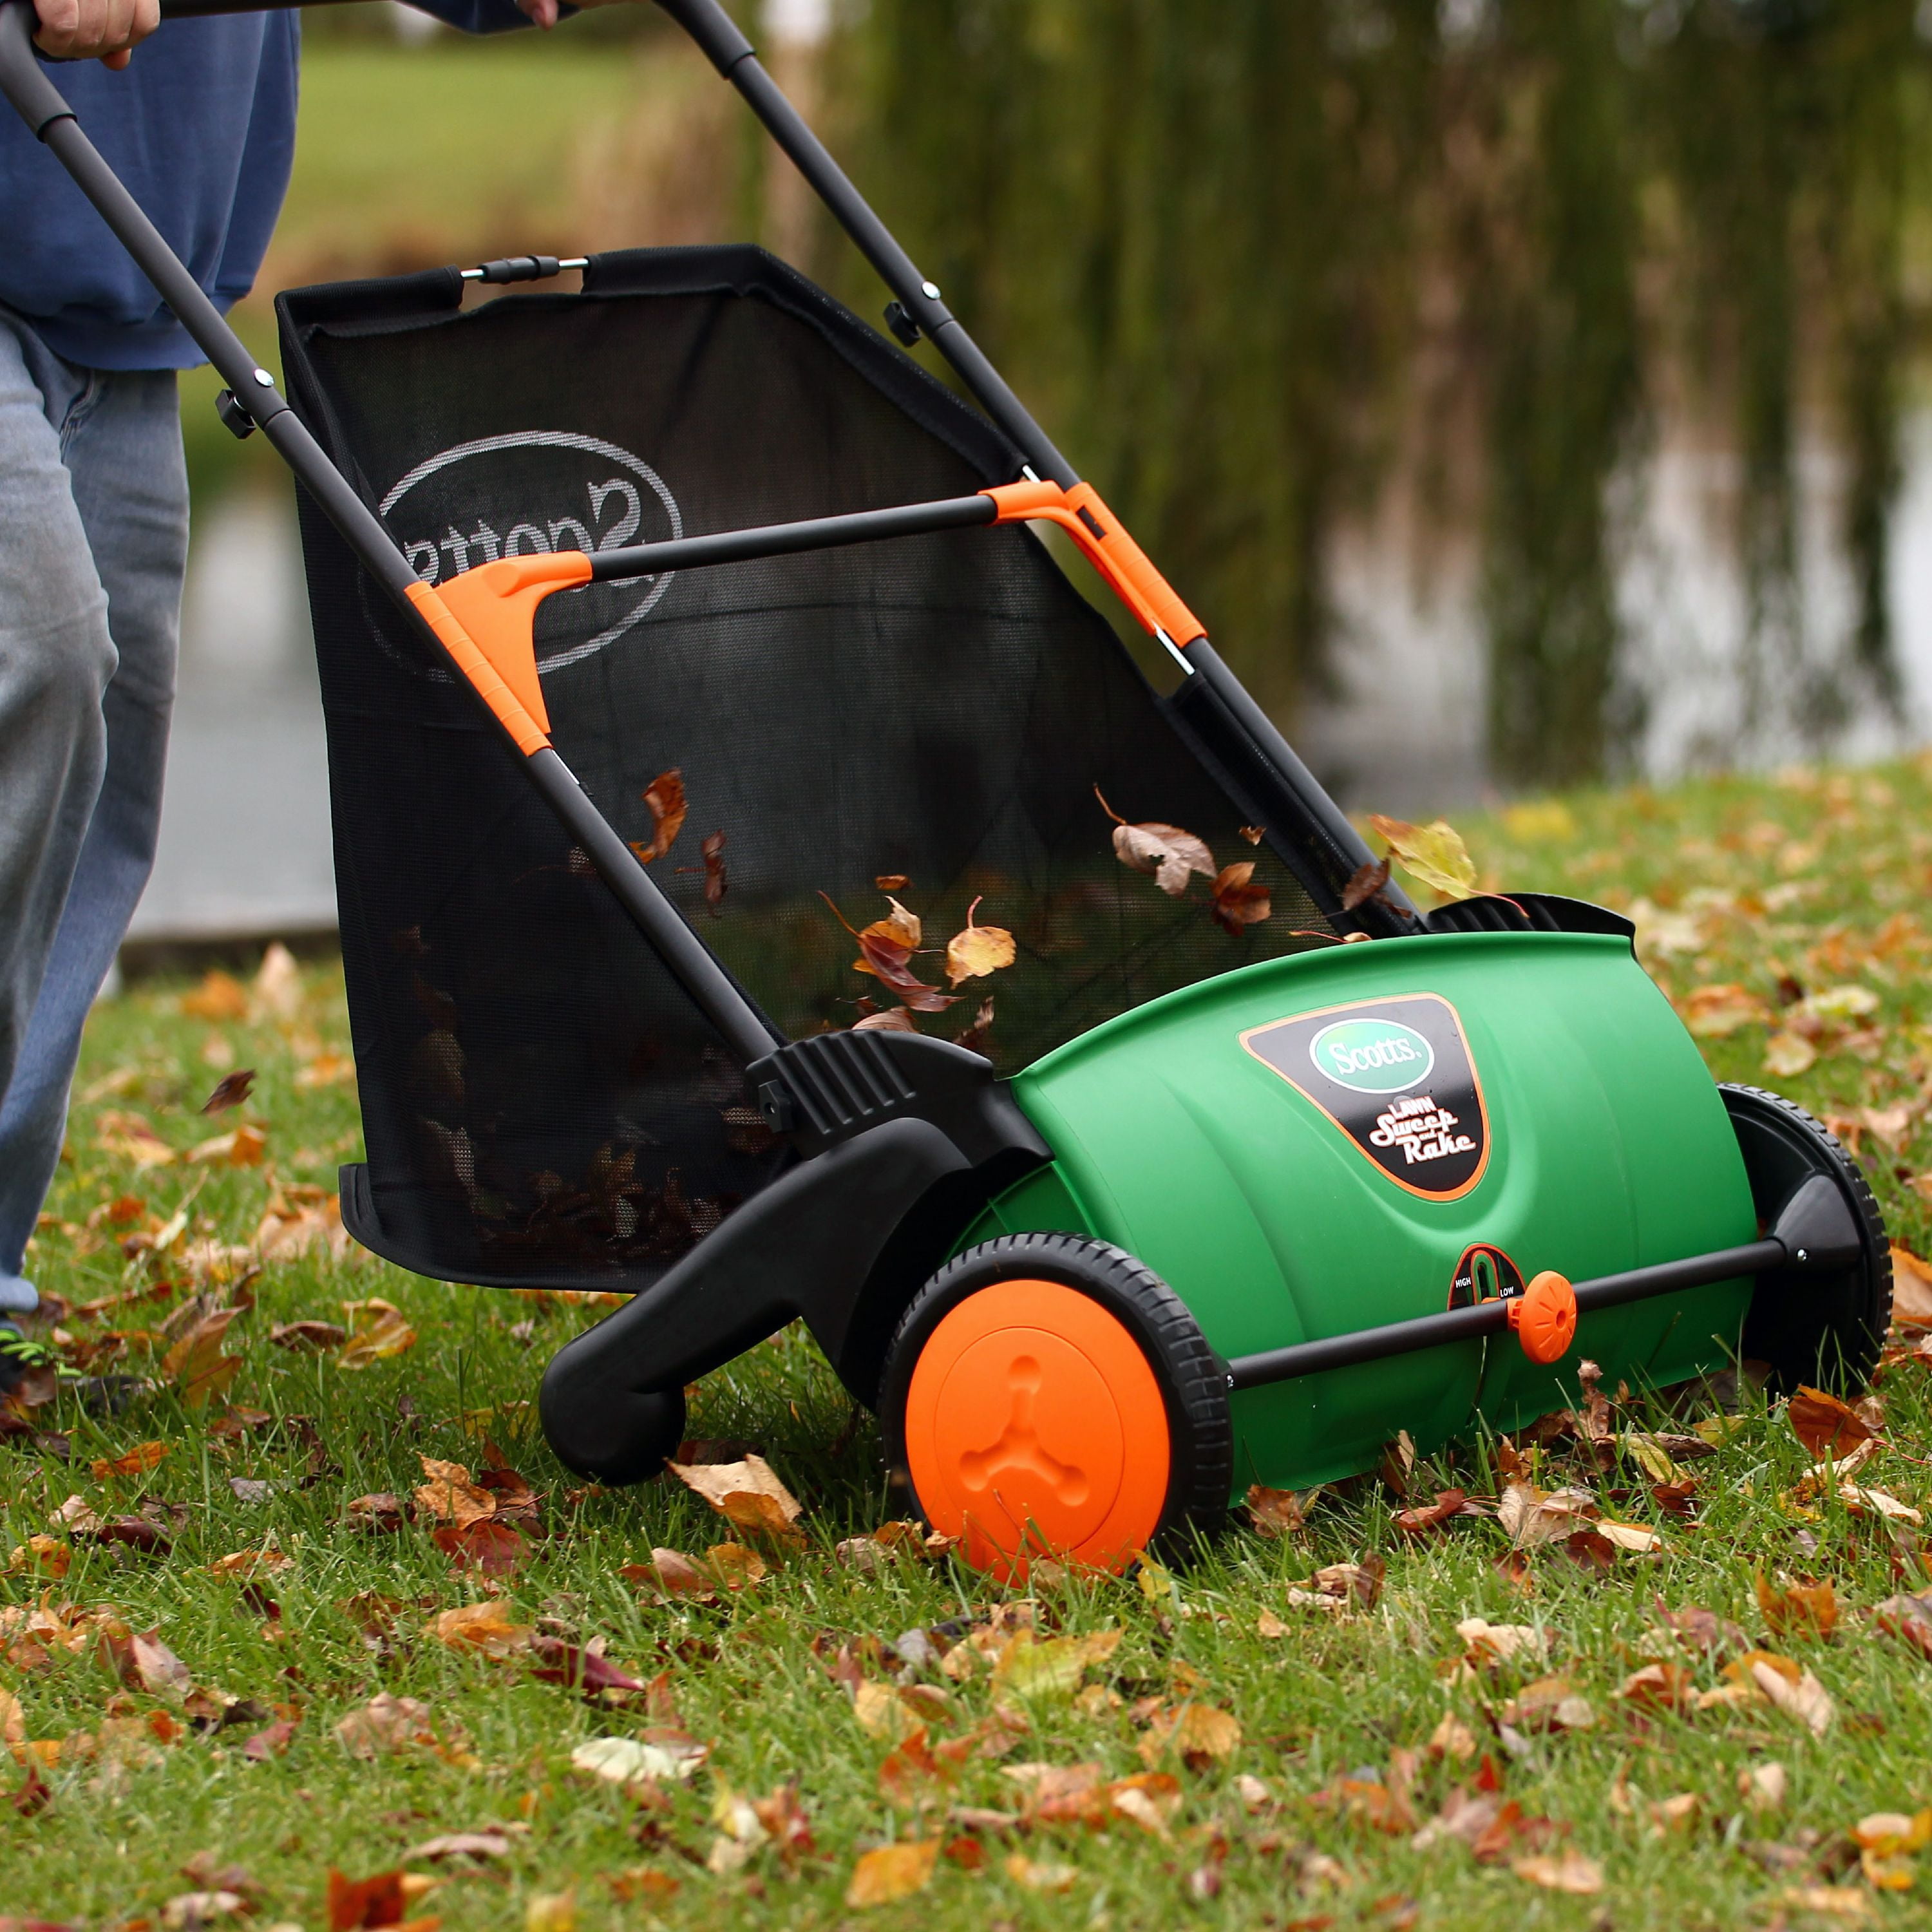 Push Lawn Sweeper Grass Clippings Leaves Collector Scotts 26 Inch Adjustable New 